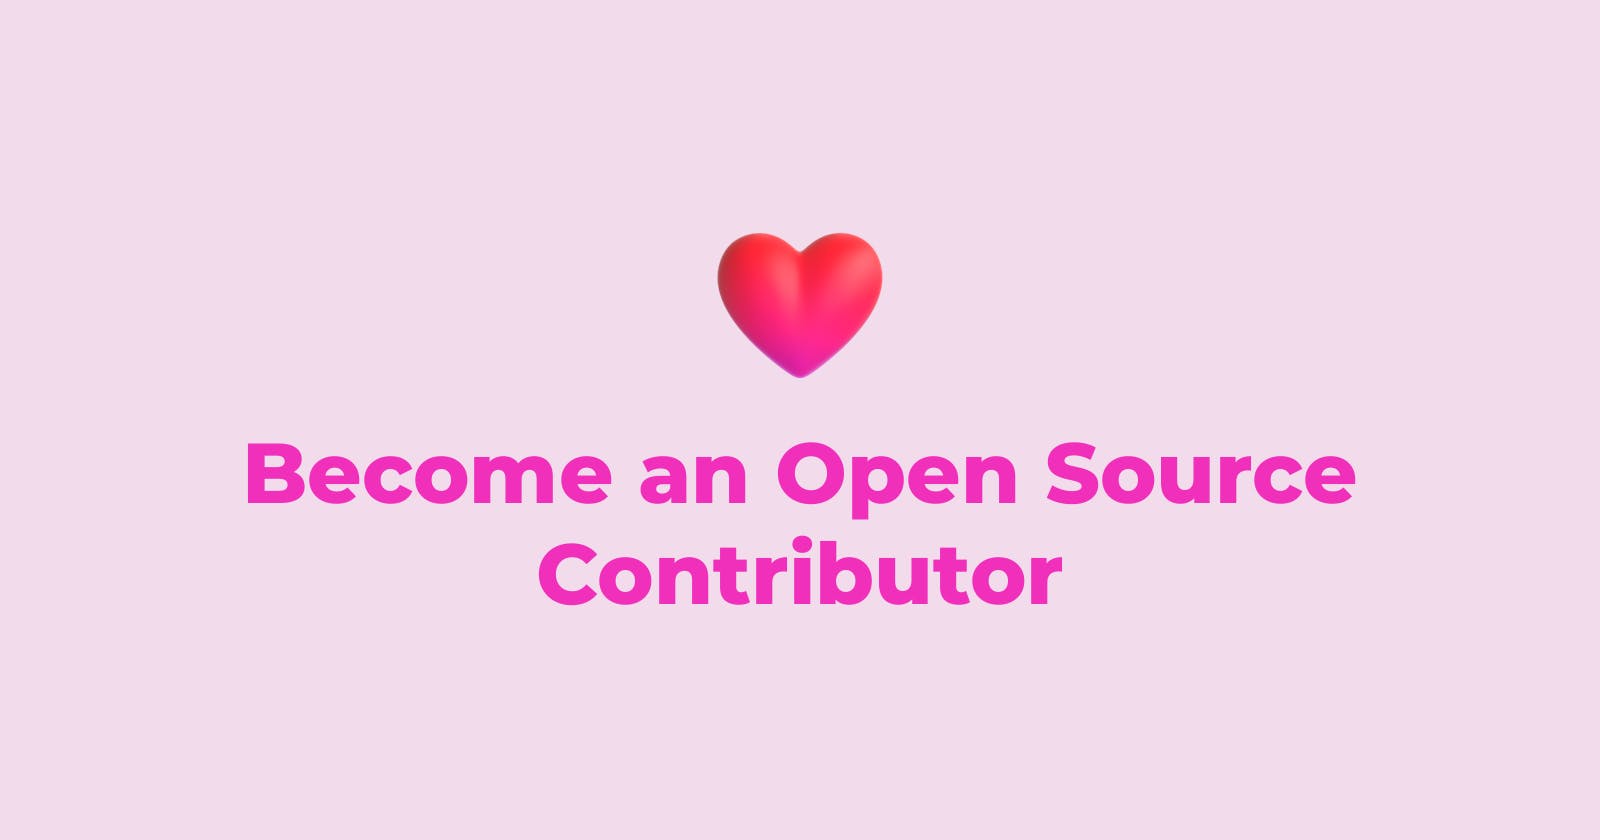 Become an Open Source Contributor